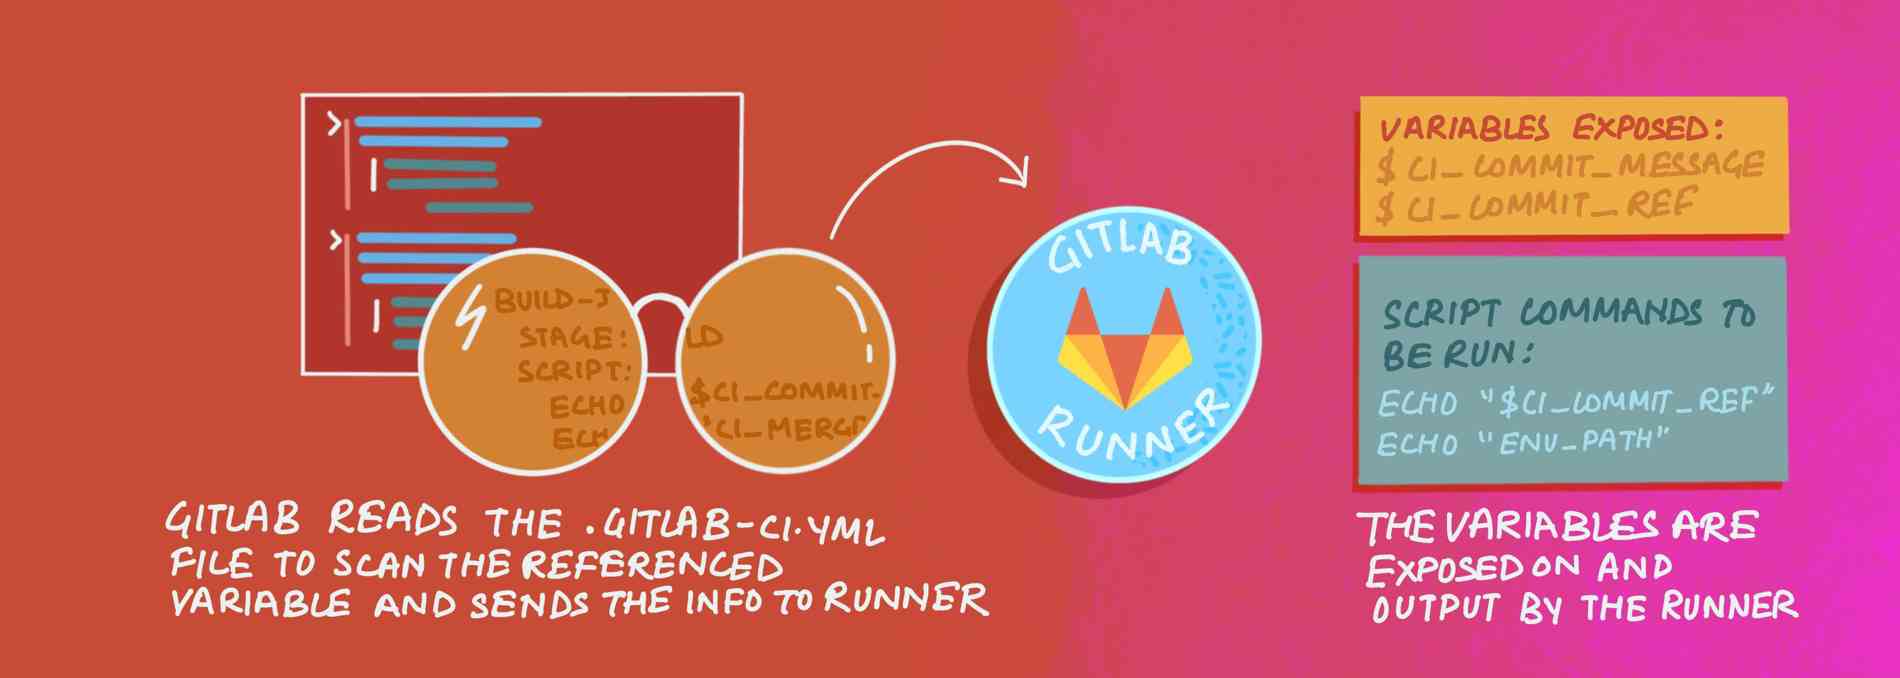 GitLab reads the .gitlab-ci.yml file to scan the referenced variable and sends the information to the GitLab Runner. The variables are exposed on and output by the runner.